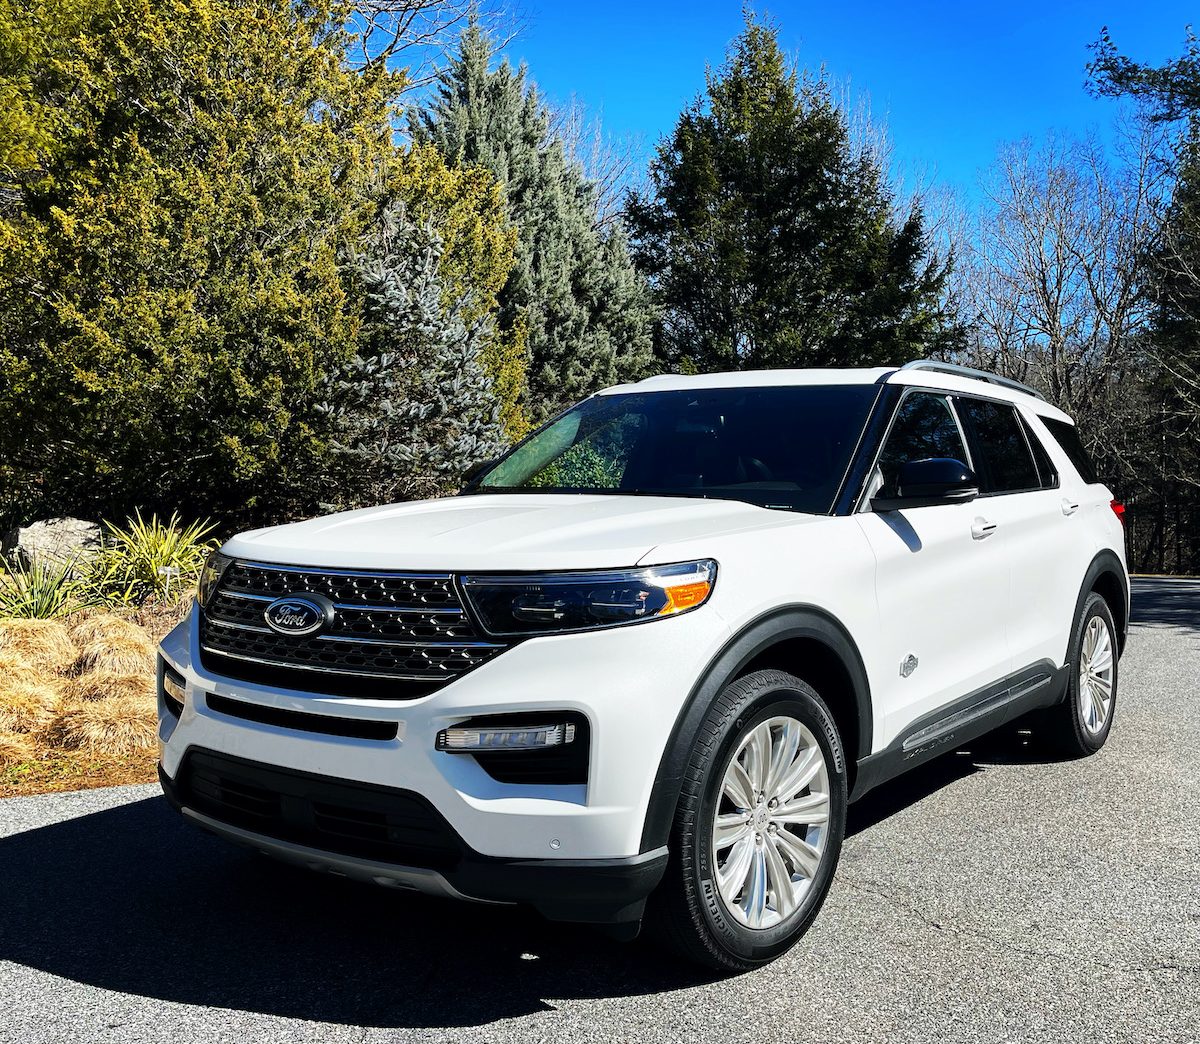 2021 Ford Explorer parked near foliage